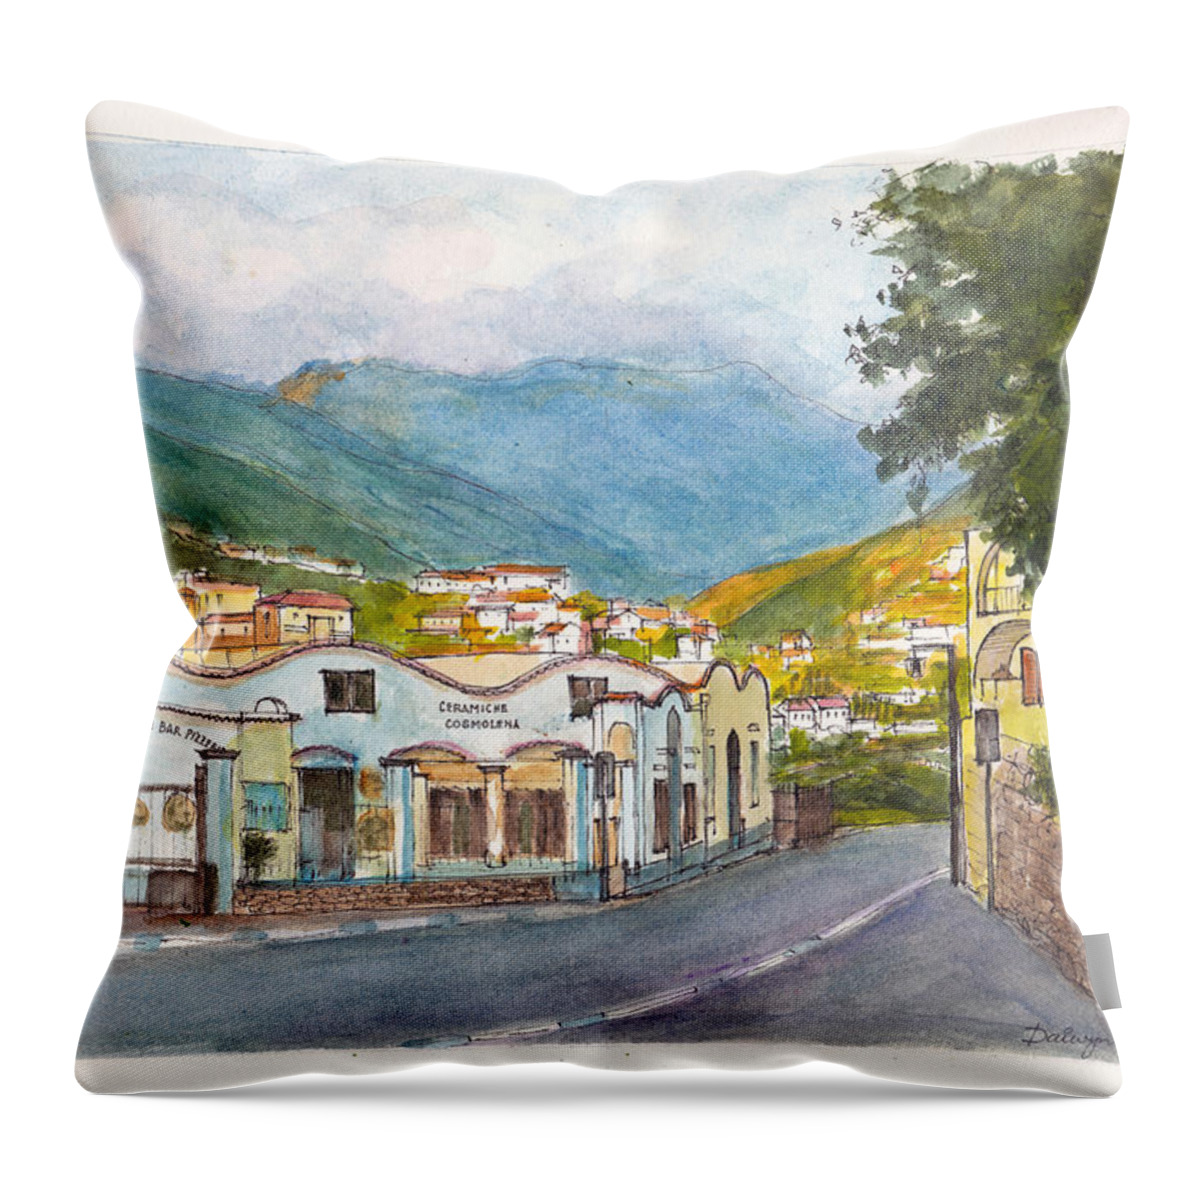 Landscape Throw Pillow featuring the painting Ravello Pizzeria by Dai Wynn